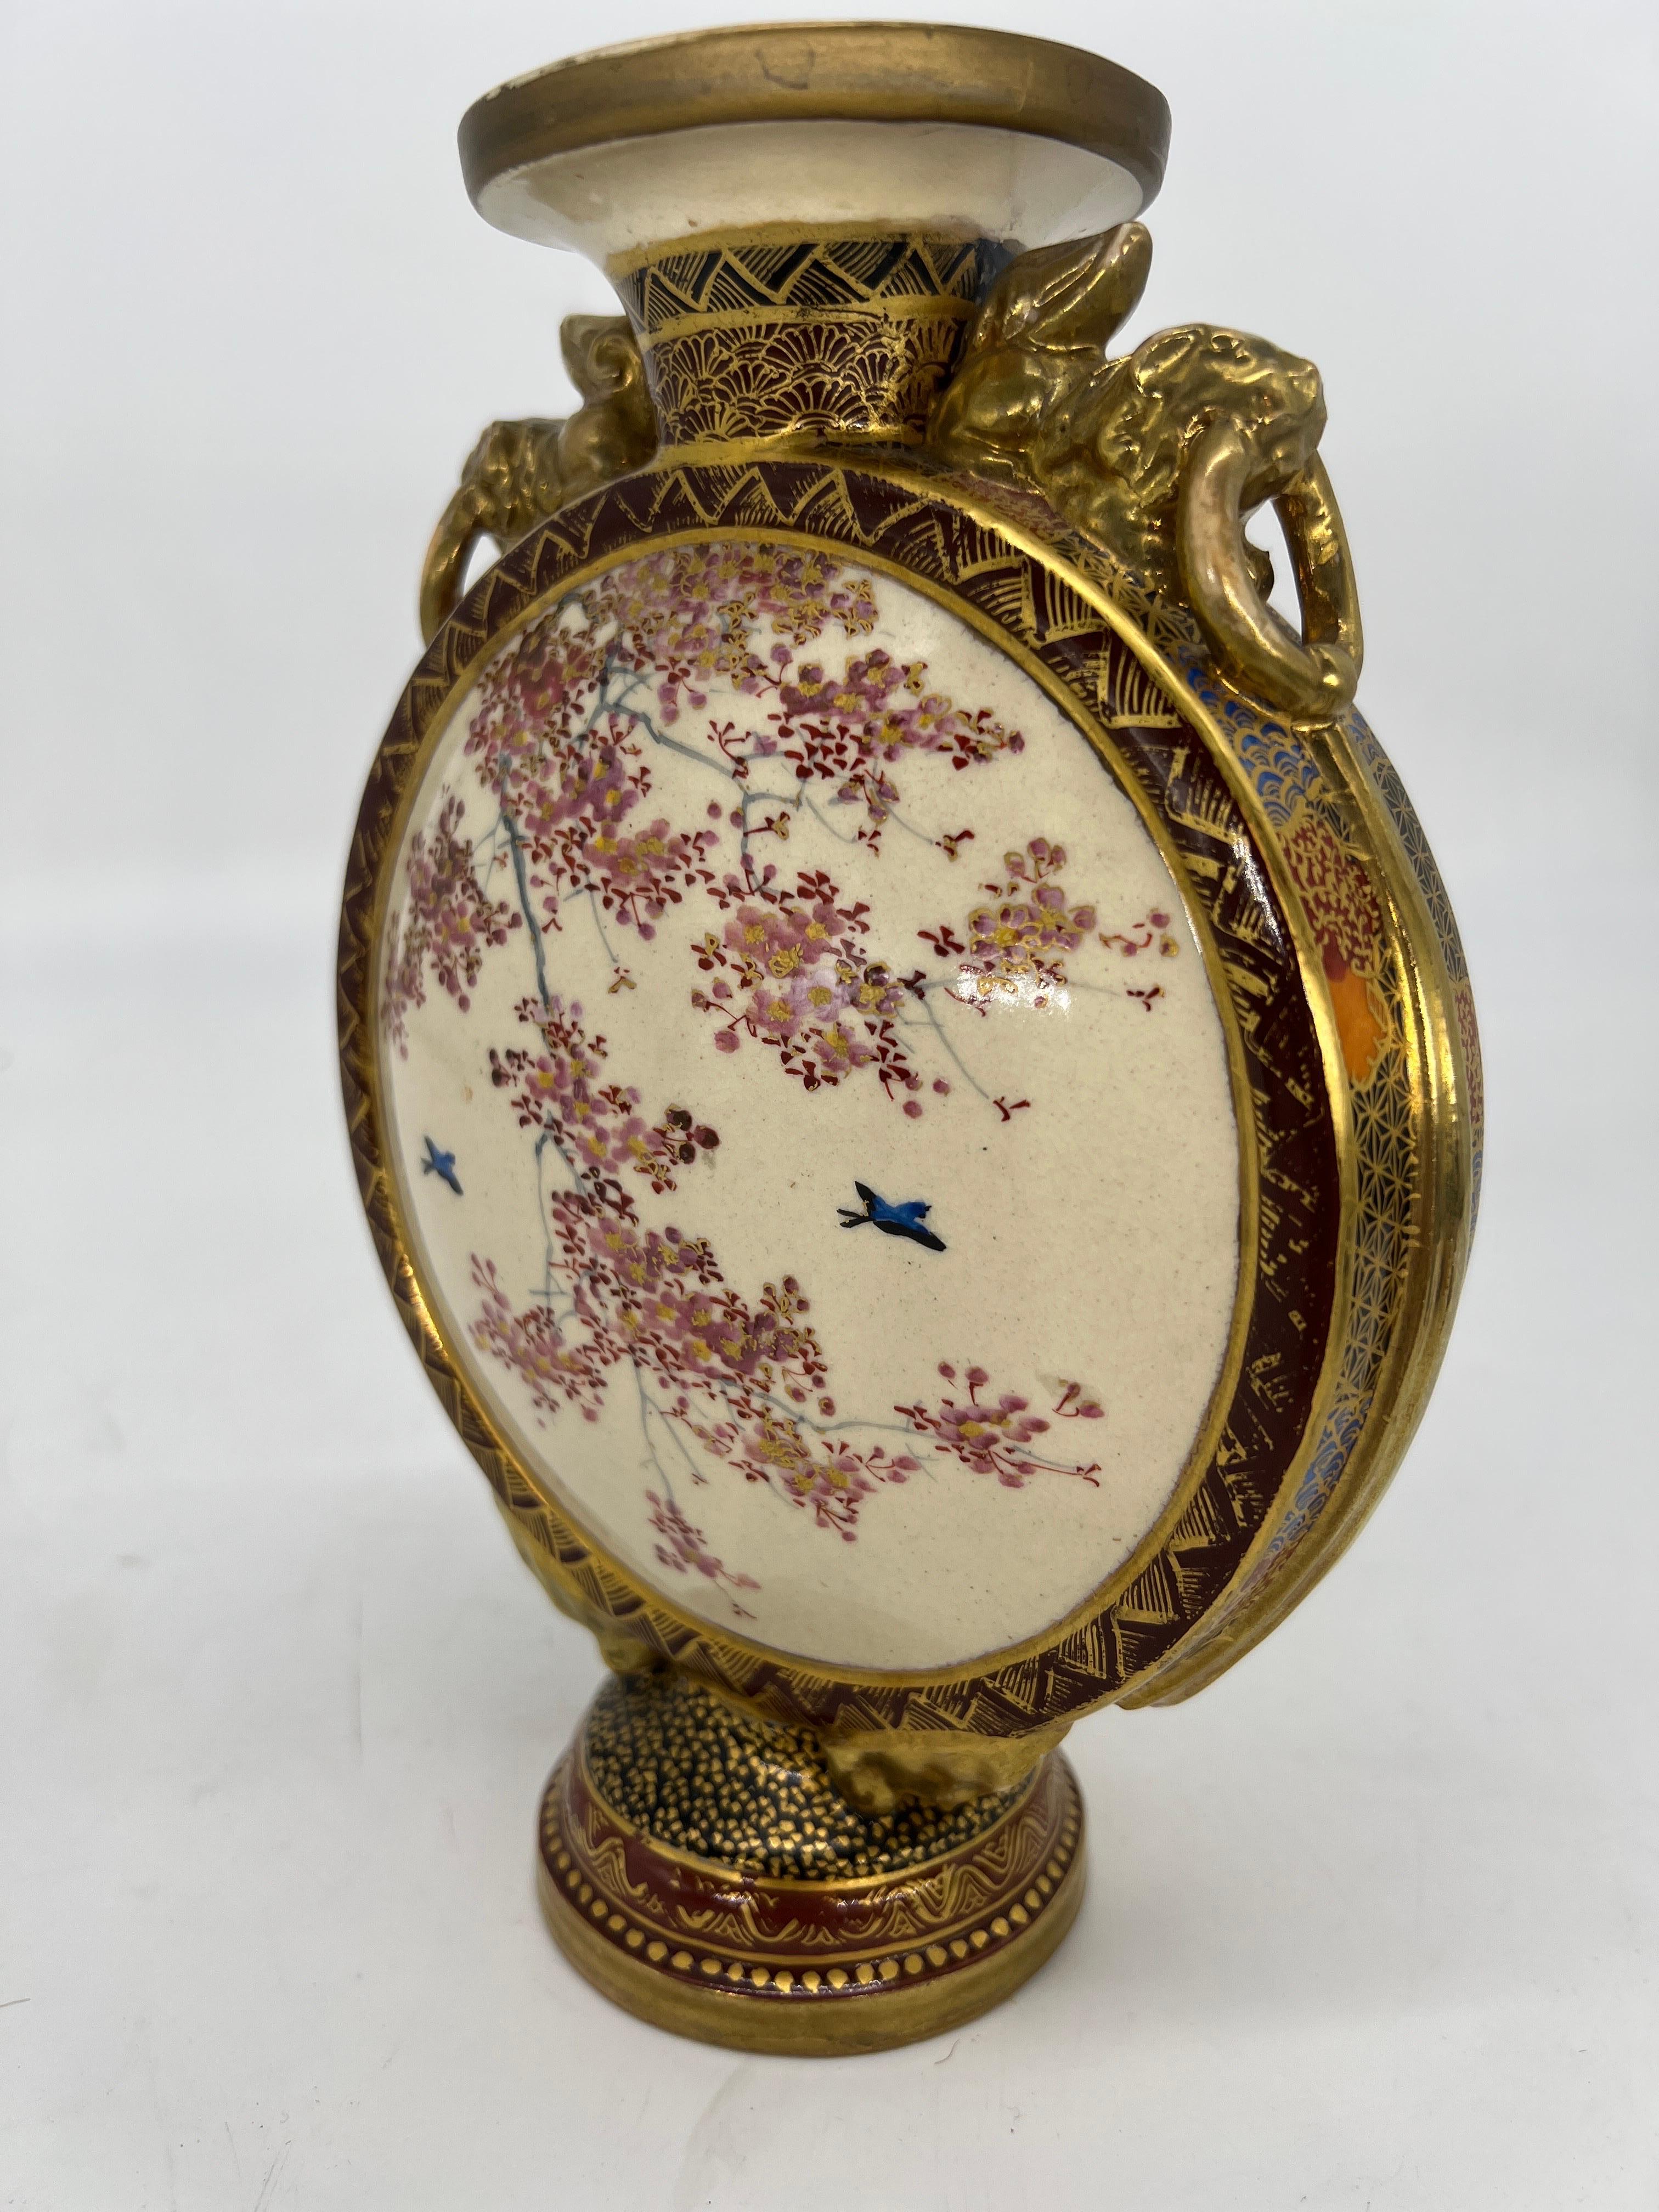 20th Century Antique Japanese Satsuma Porcelain Moon Flask Vase Decorated With Peacocks For Sale